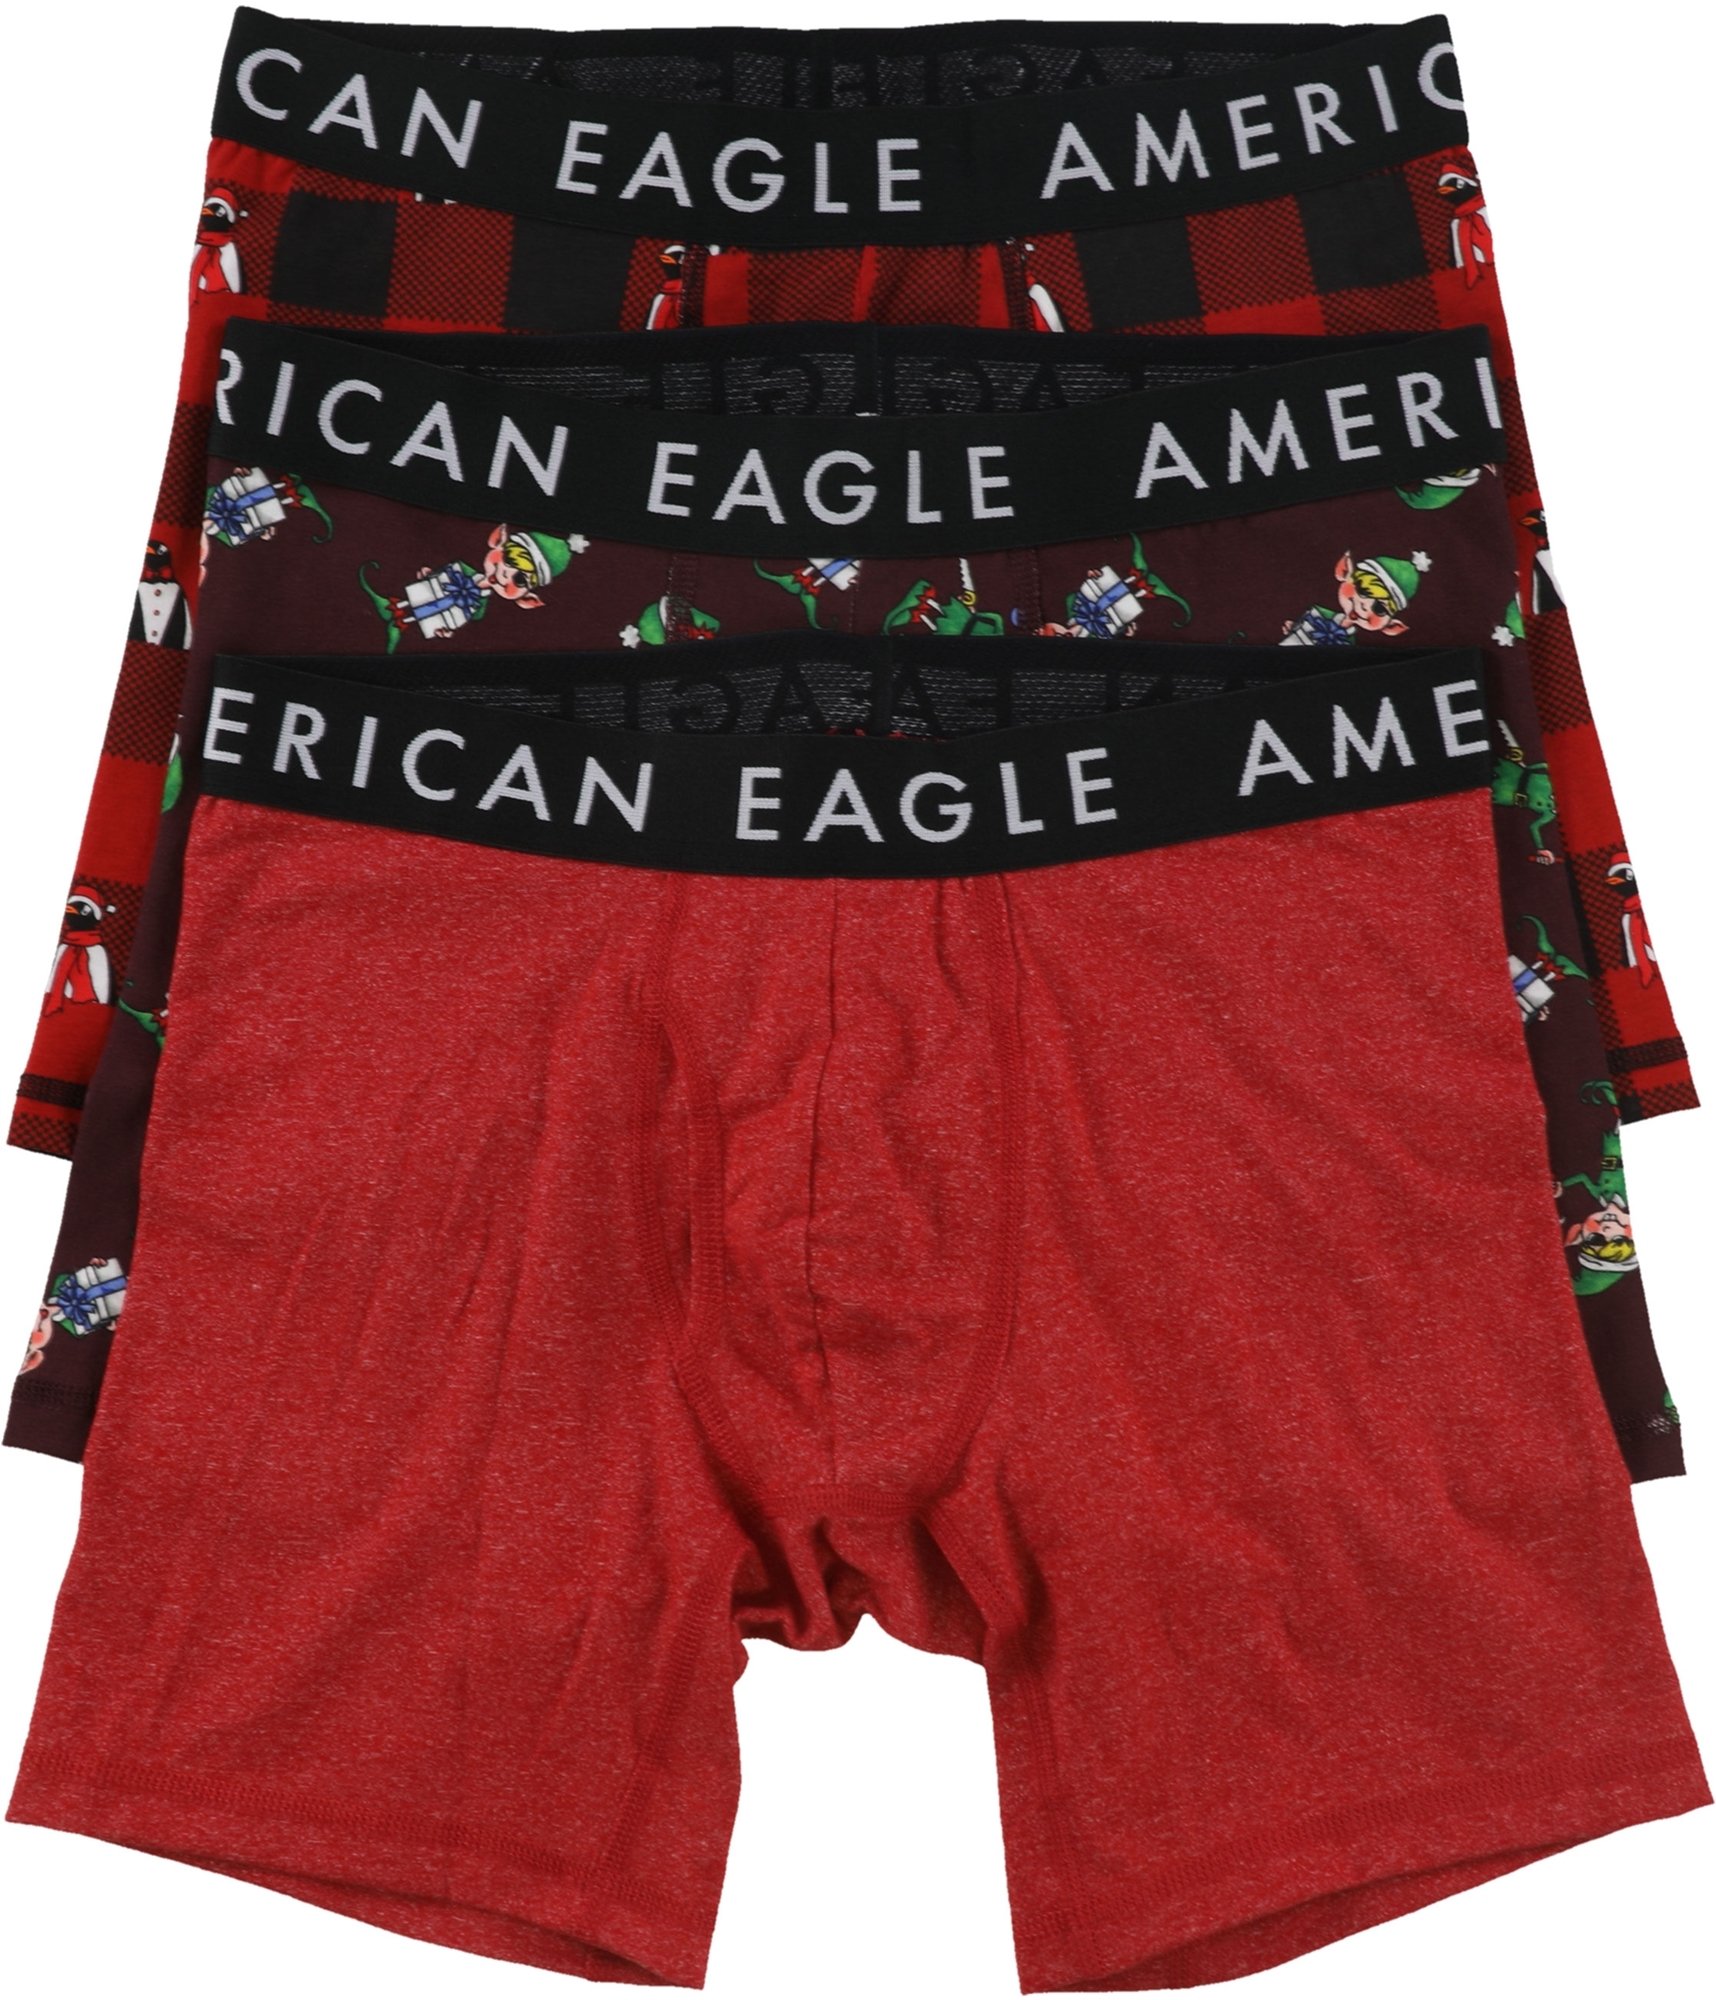 Buy a American Eagle Mens 3 Pack Holiday Underwear Boxer Briefs